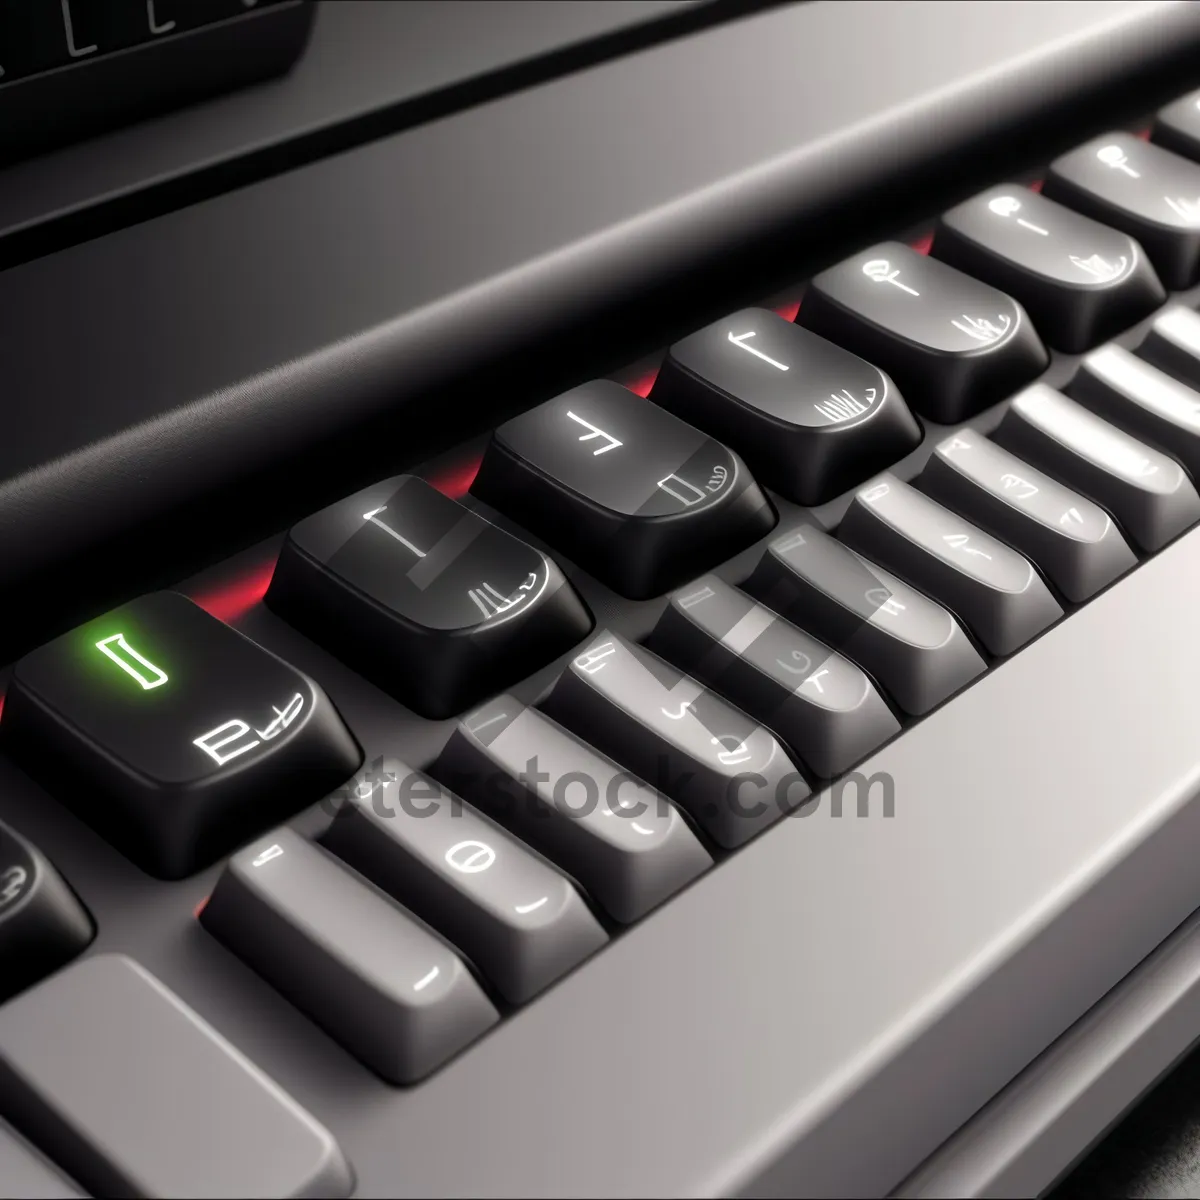 Picture of Modern computer keyboard with letter keys - closeup